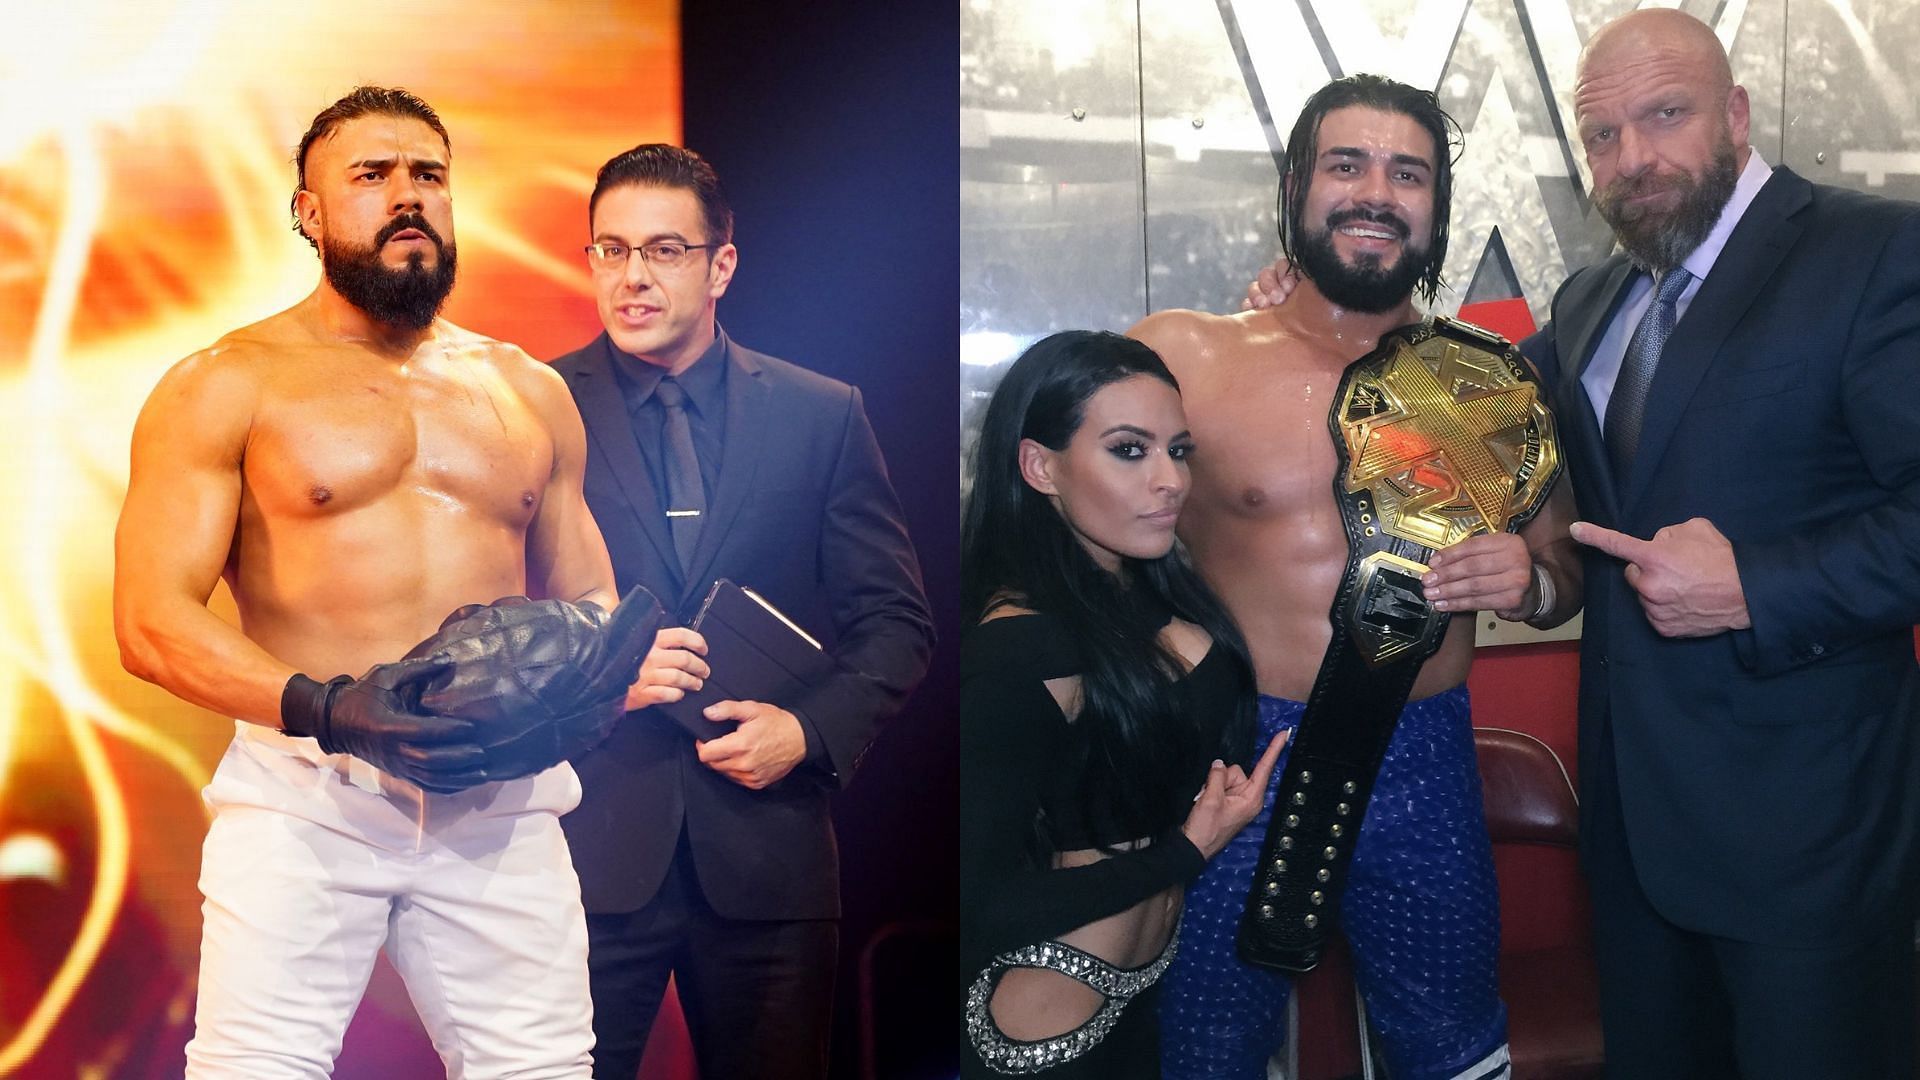 Andrade El Idolo was seen at the Hall of Fame ceremony